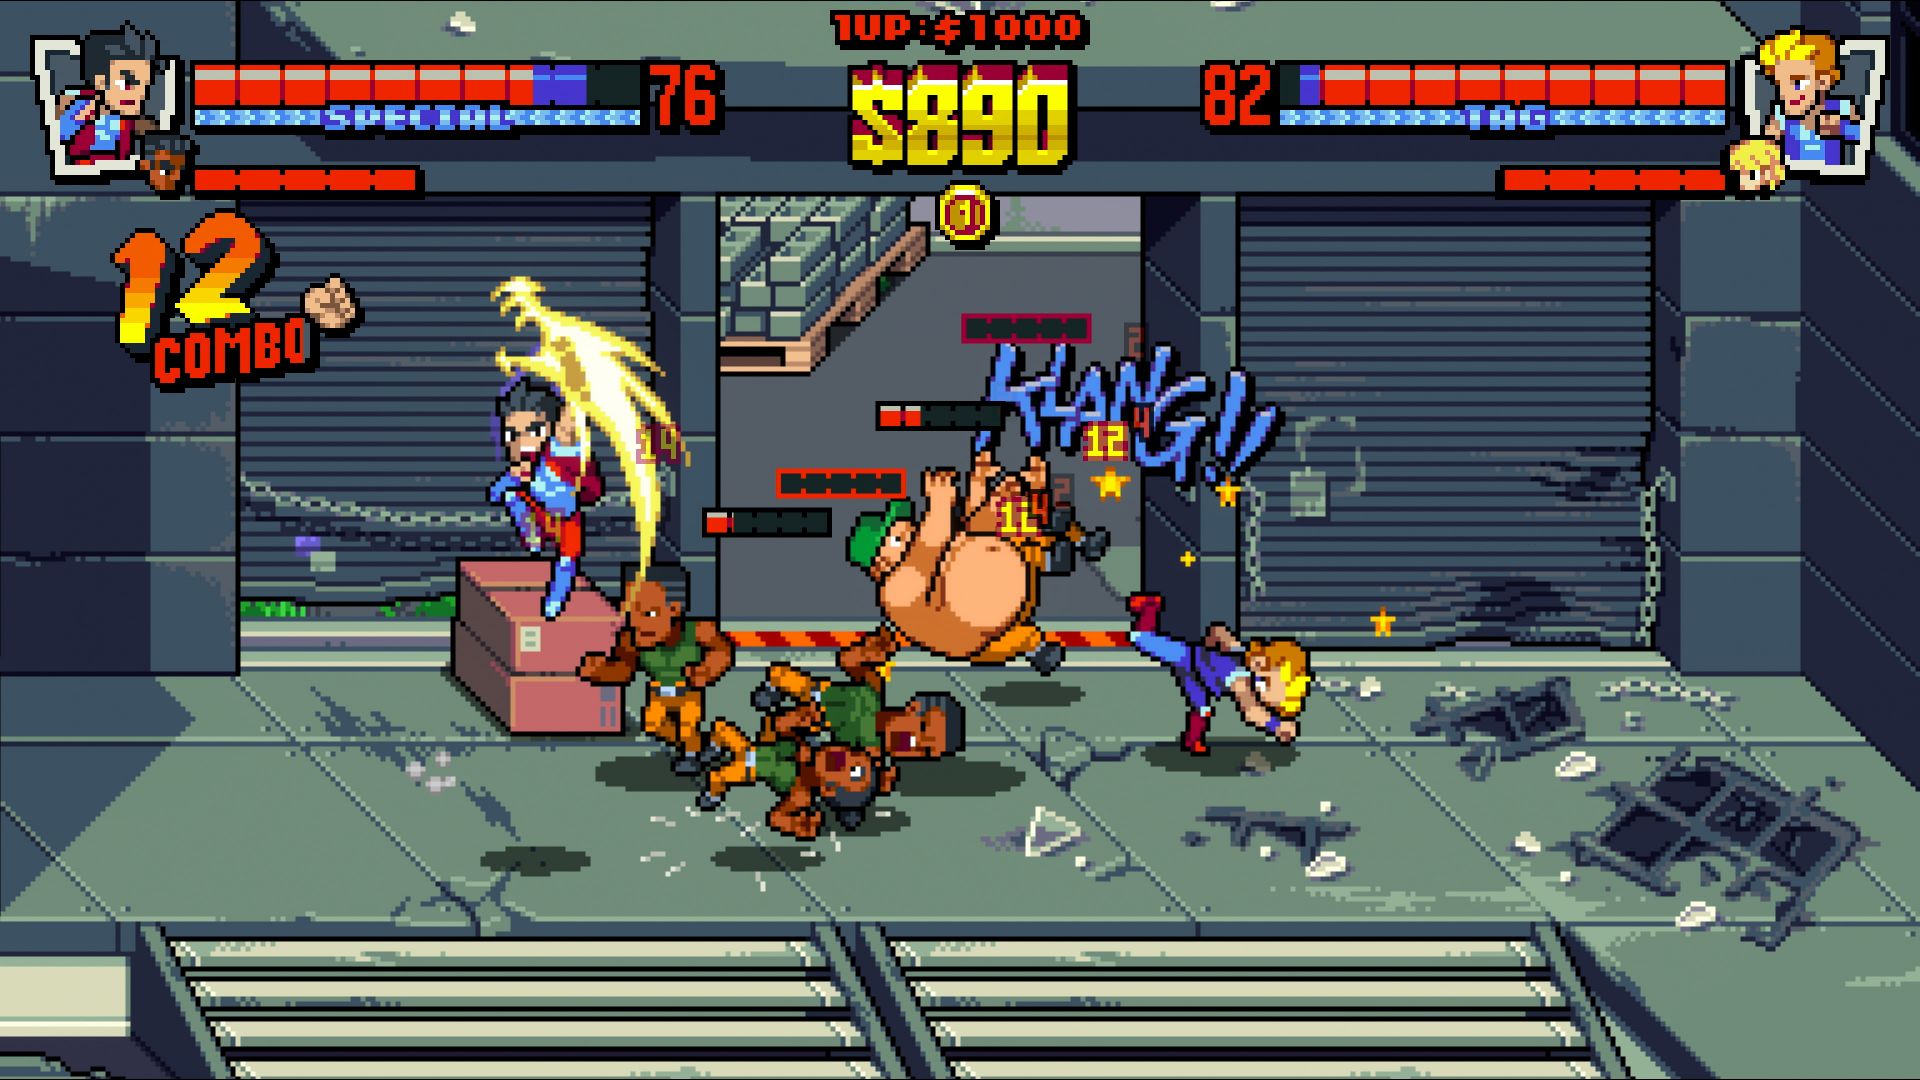 Arc System Works Announces Double Dragon 4 for PS4, PC